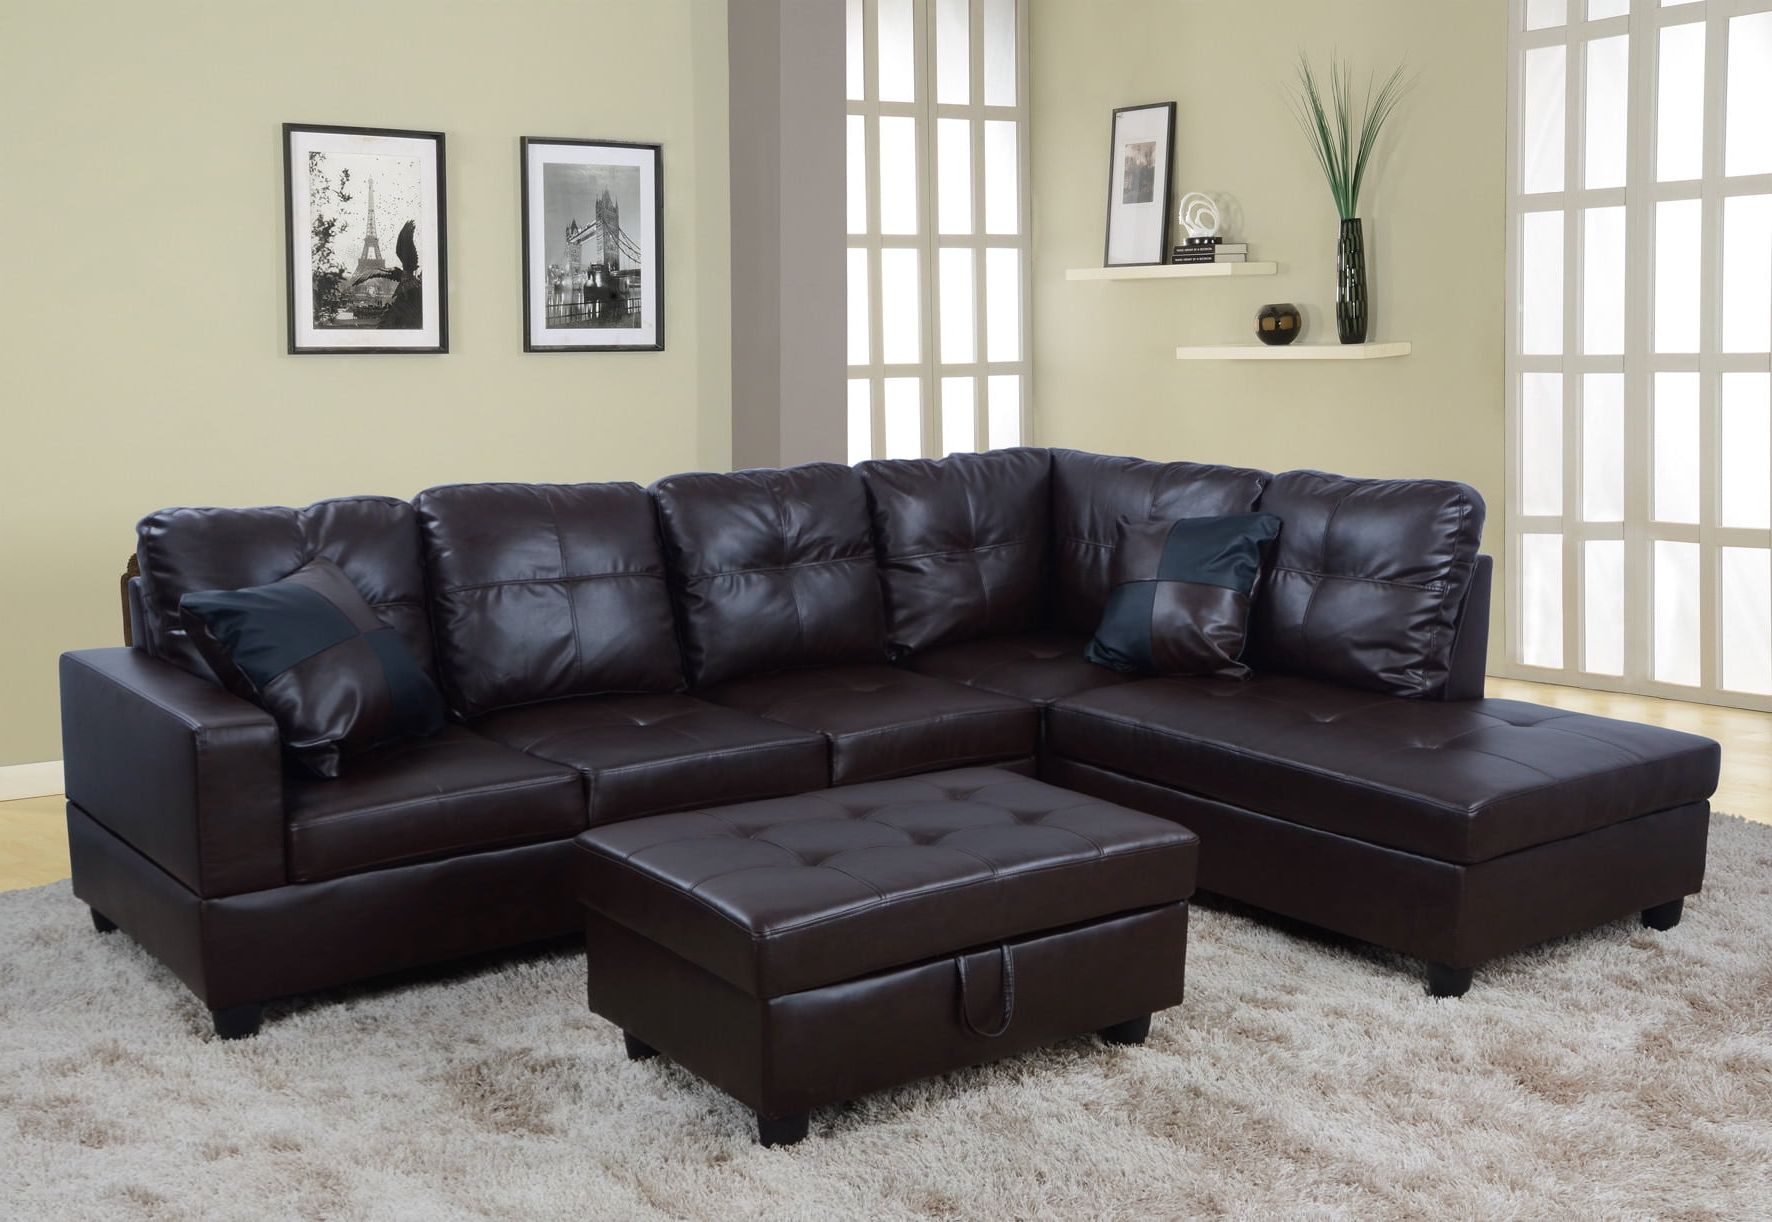 Ponliving Furniture Raphael Brown Faux Leather Left Facing Sectional Throughout Faux Leather Sectional Sofa Sets (View 15 of 20)